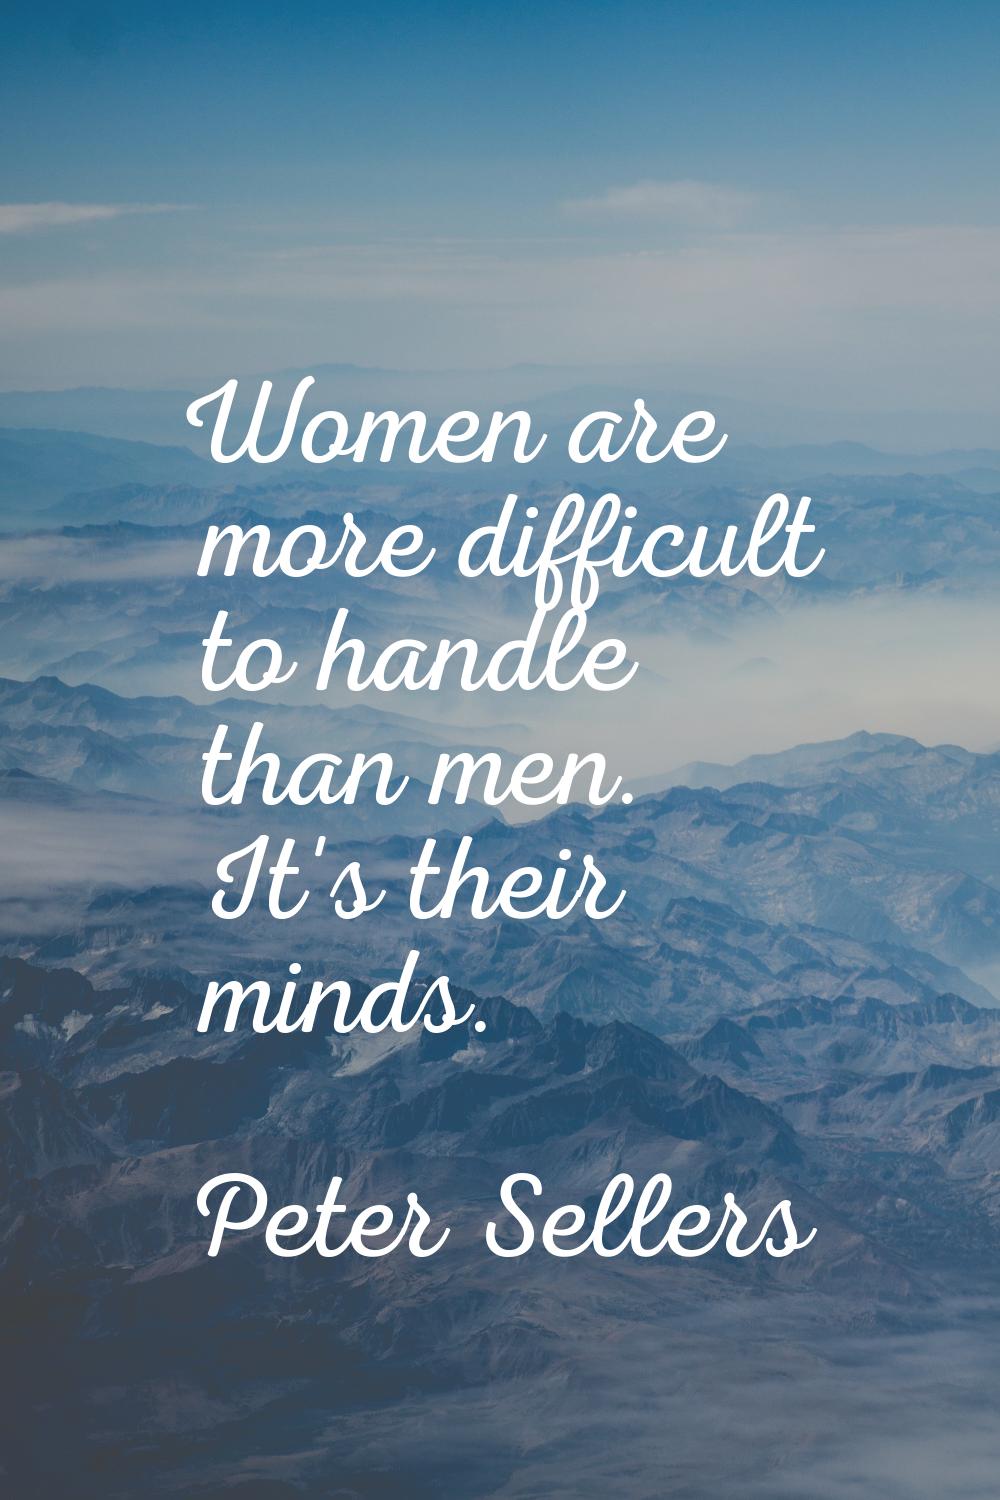 Women are more difficult to handle than men. It's their minds.